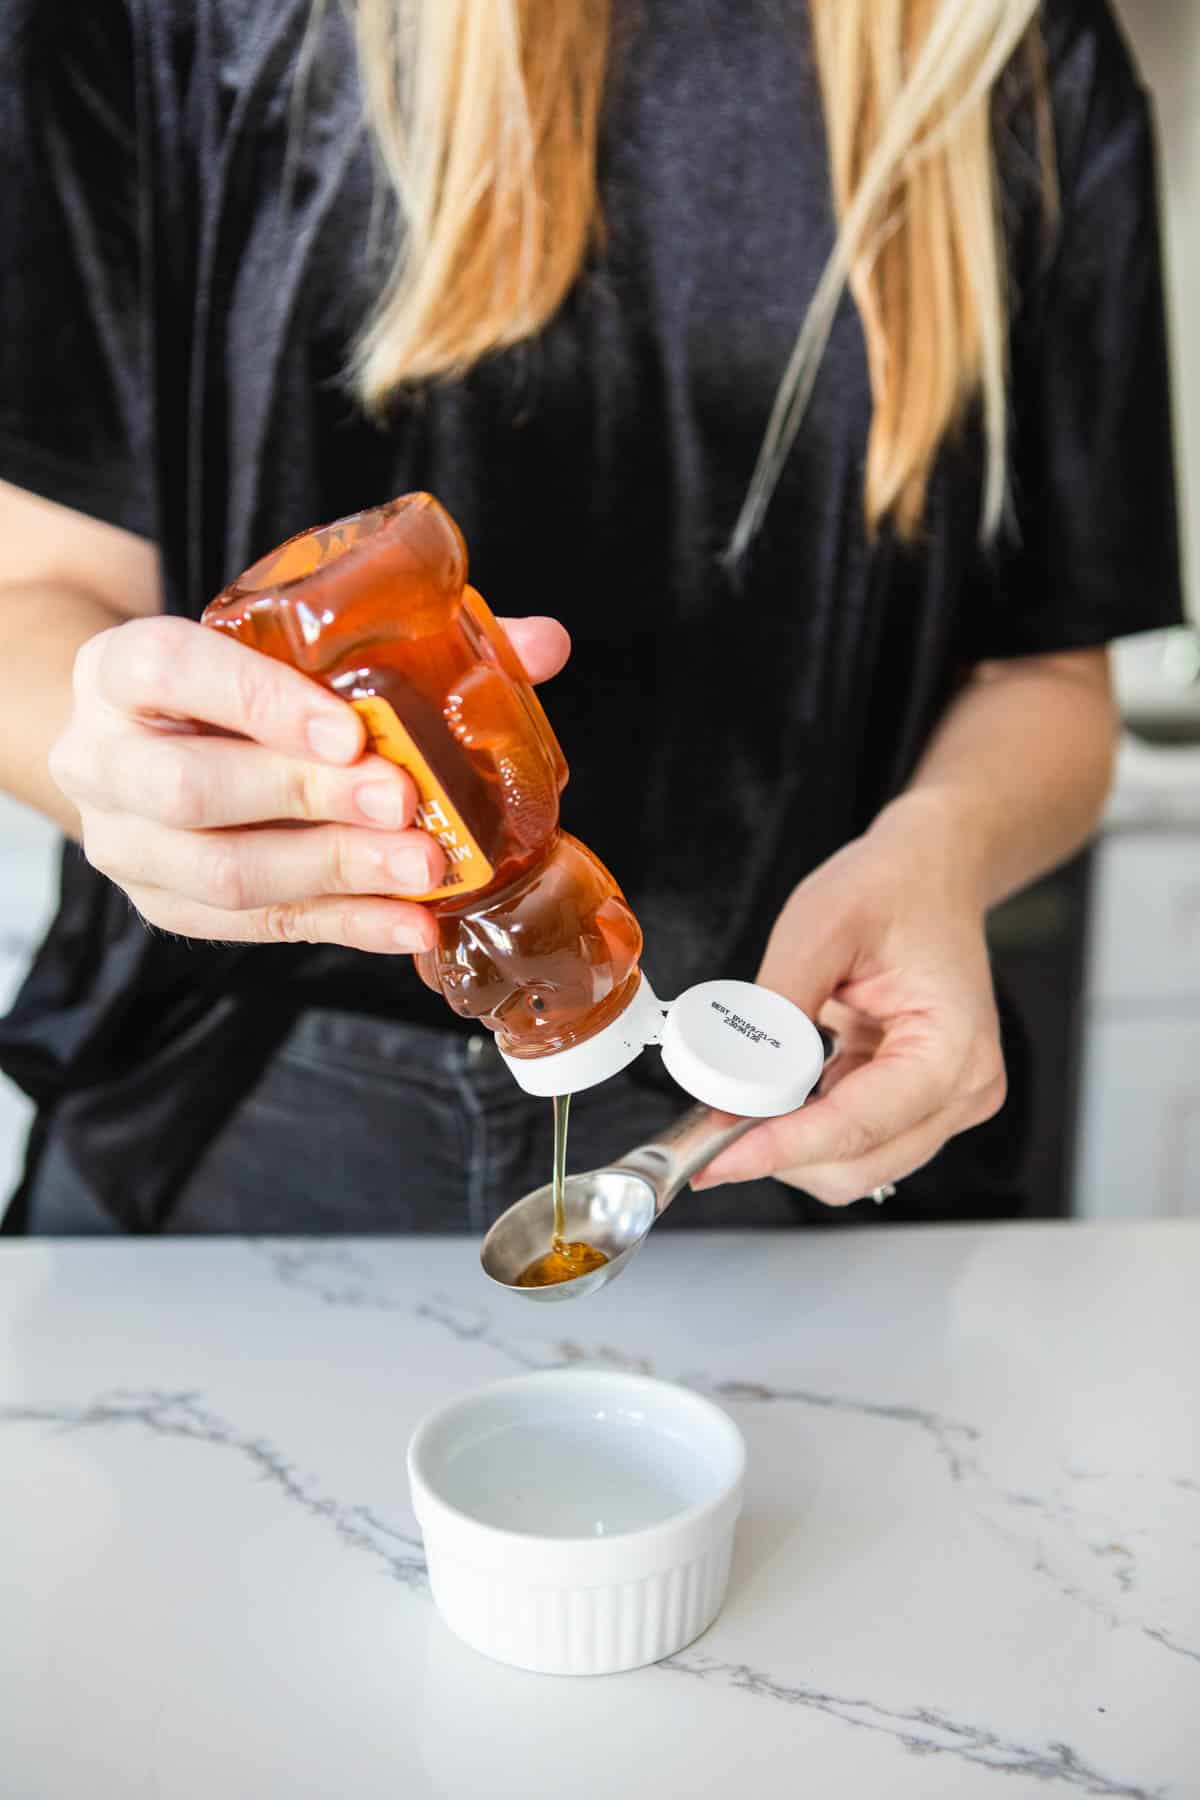 Woman squeezing honey into a small glass dish.